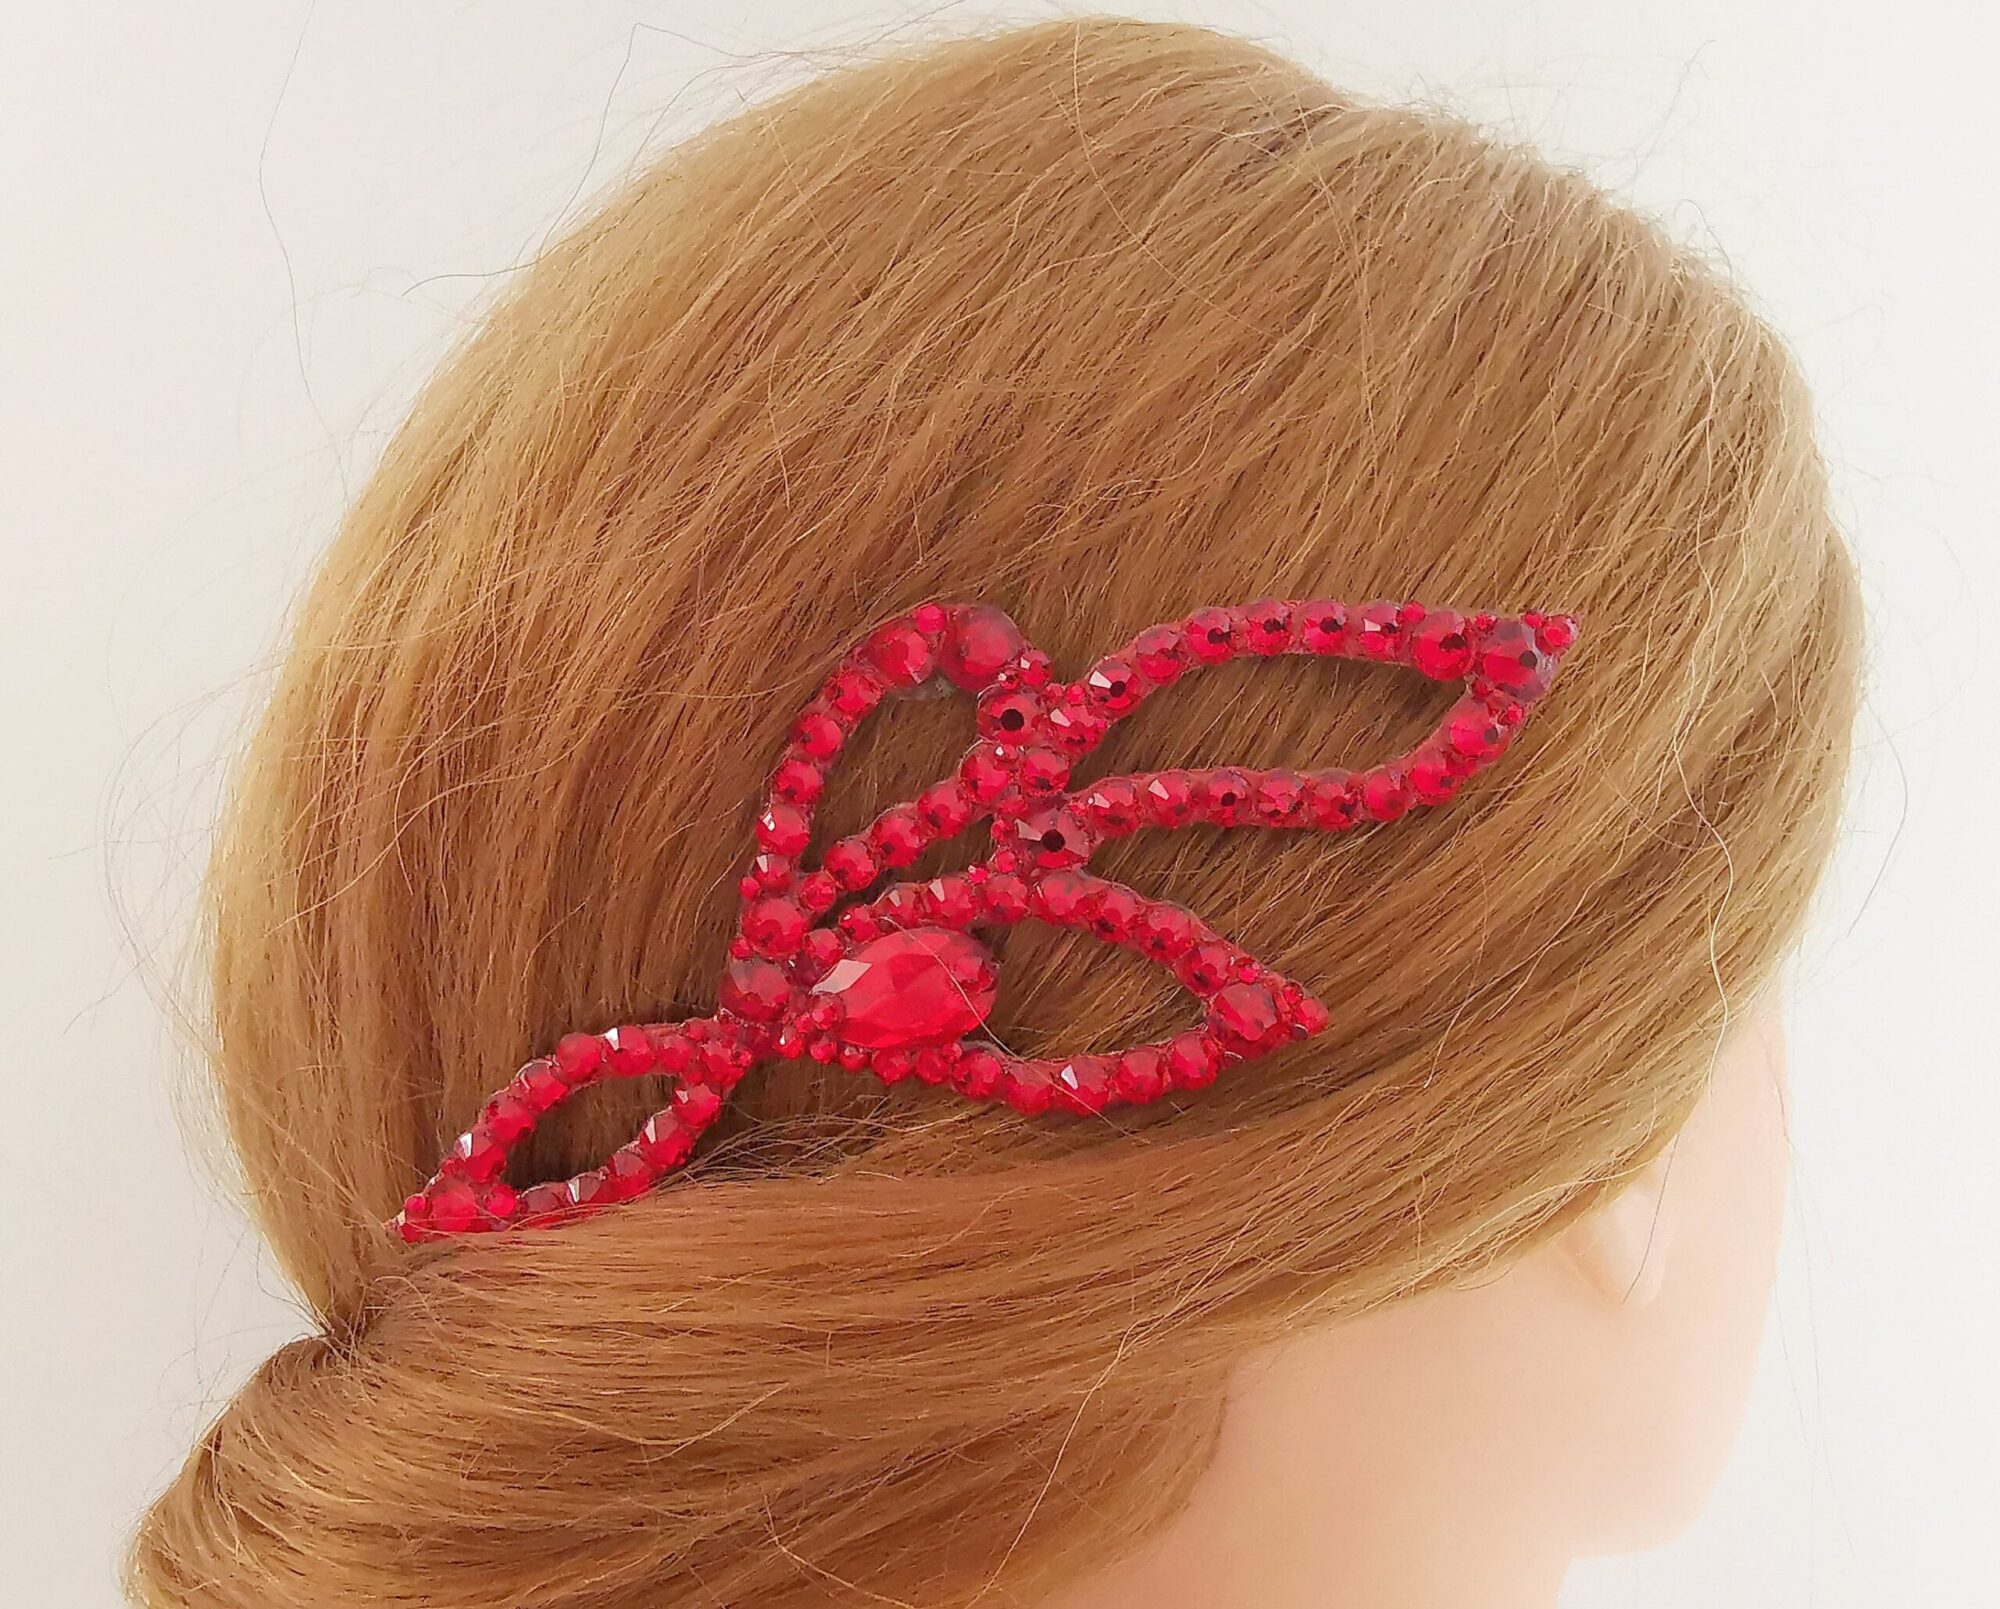 Ballroom hair piece with red crystals